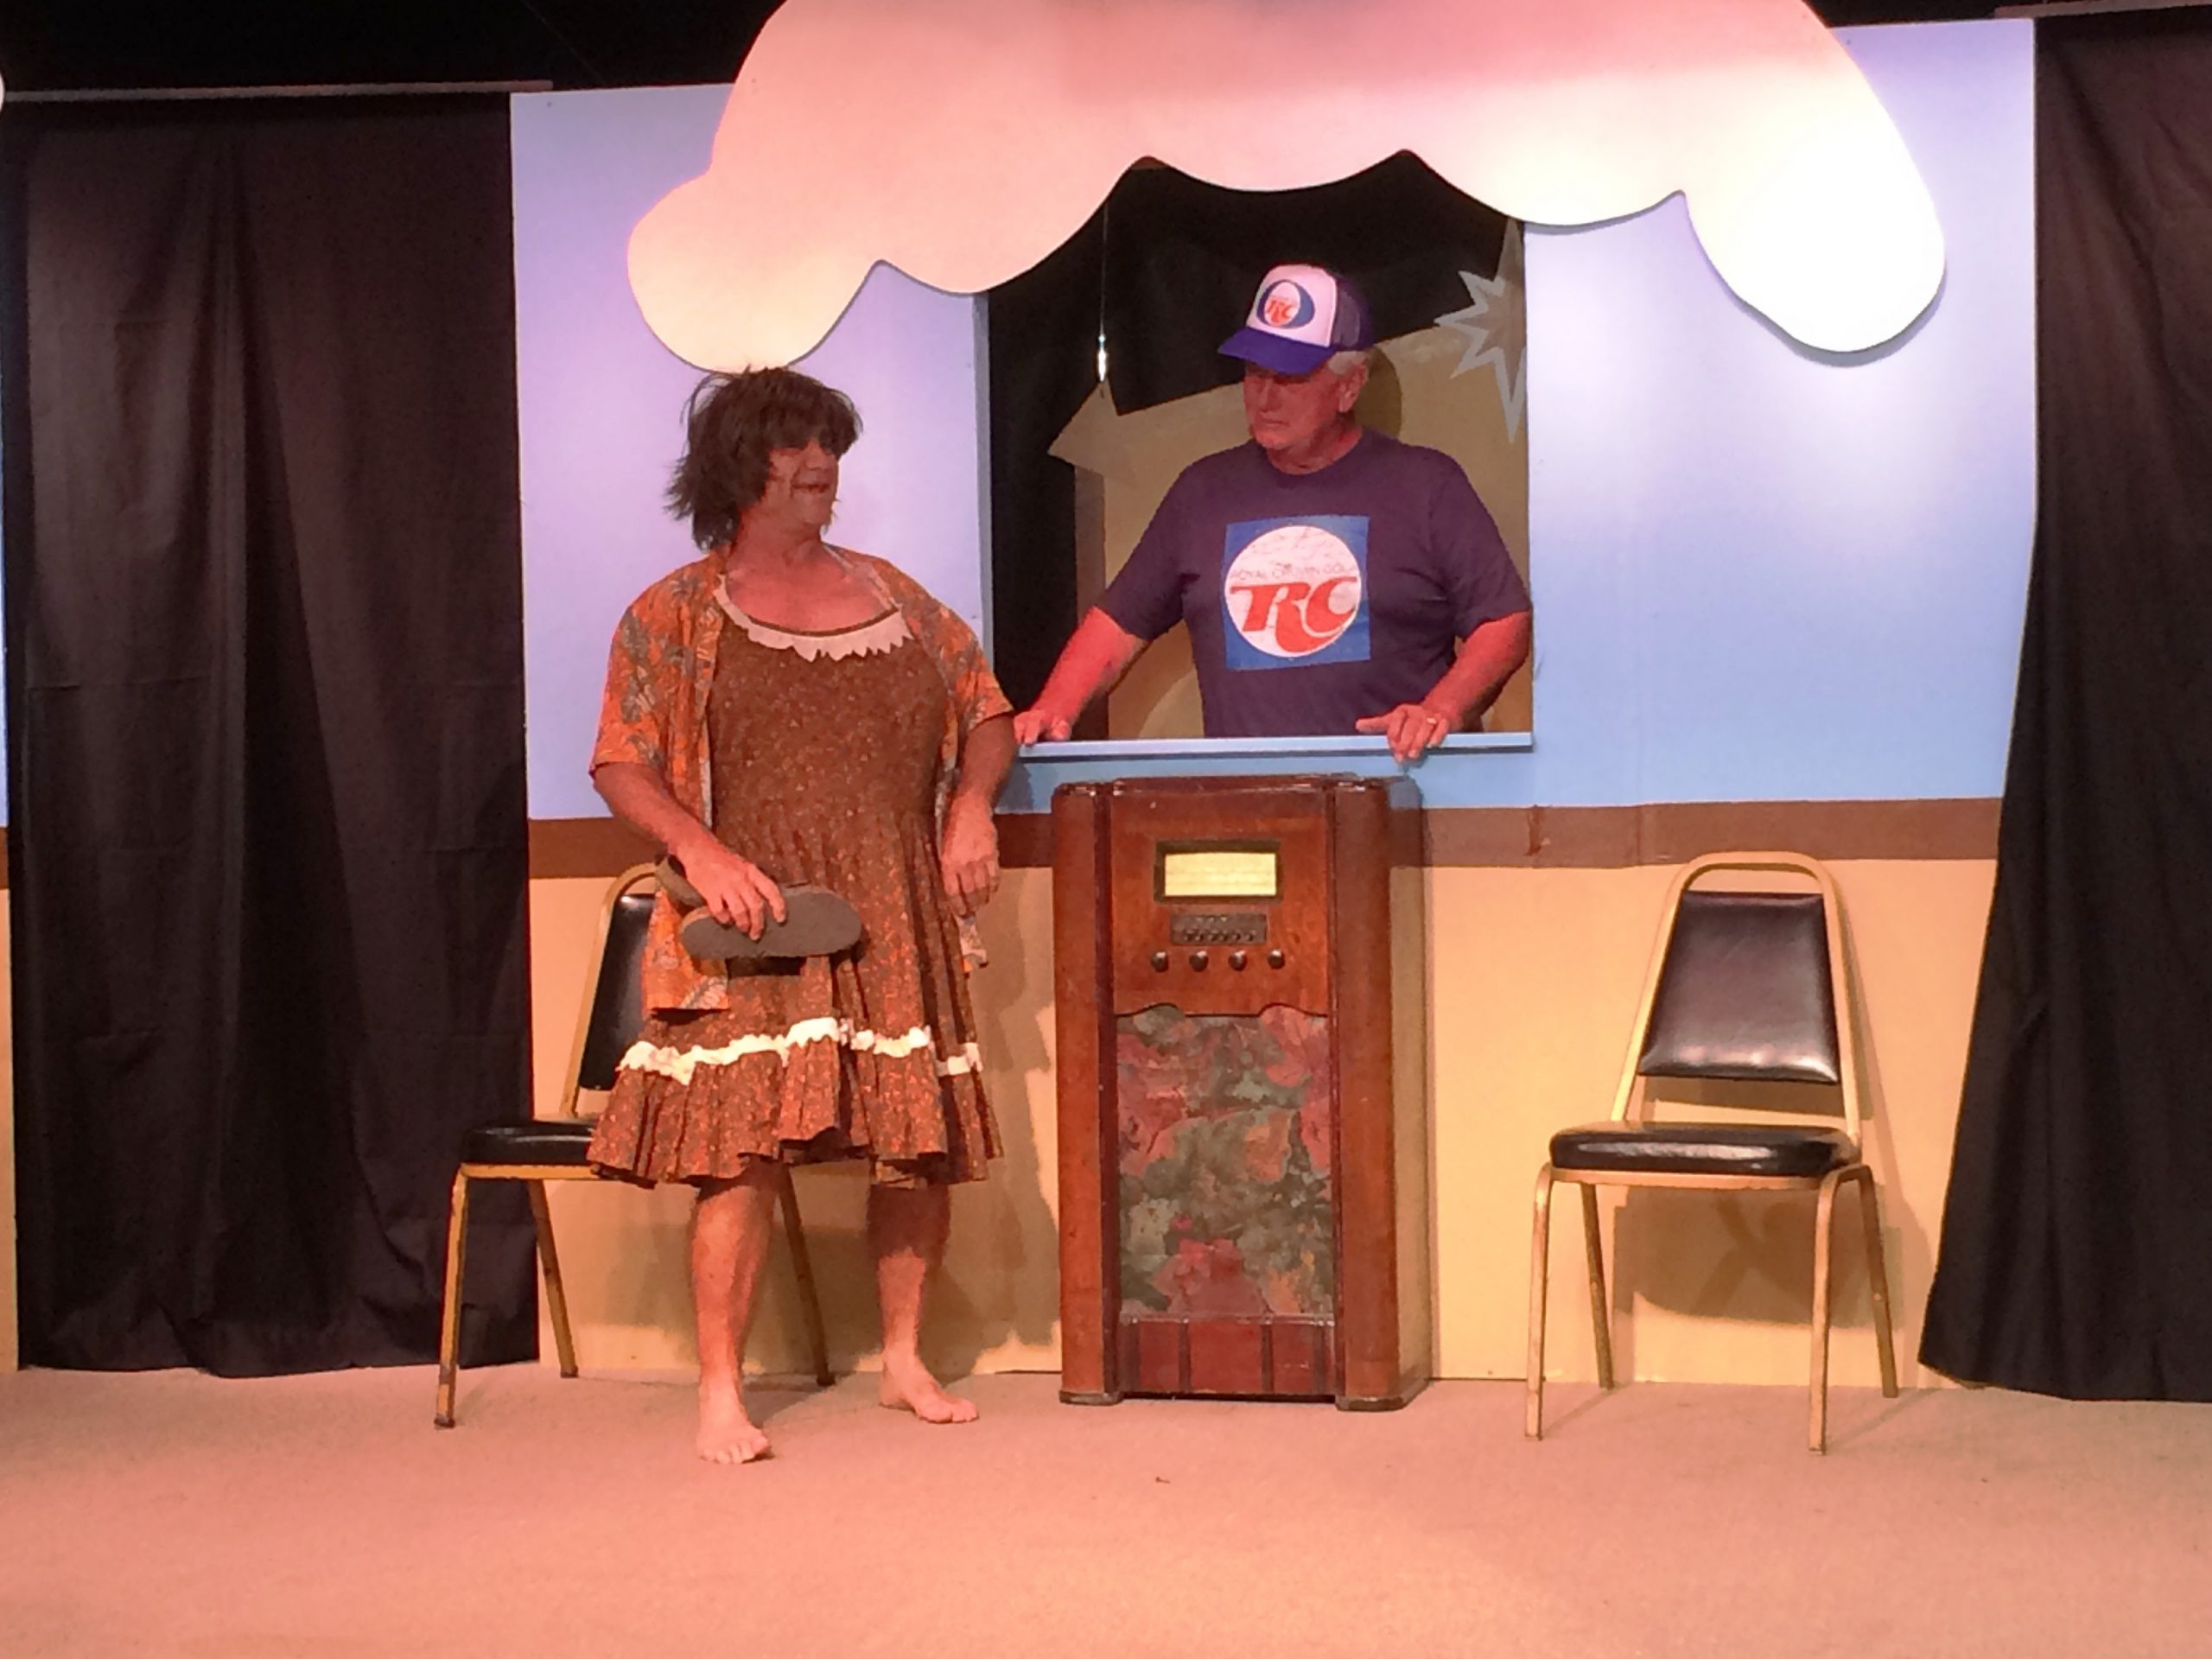 A male aA female actor wearing a dress speaks with a male actor wearing a t-shirt and hat and standing behind a counter